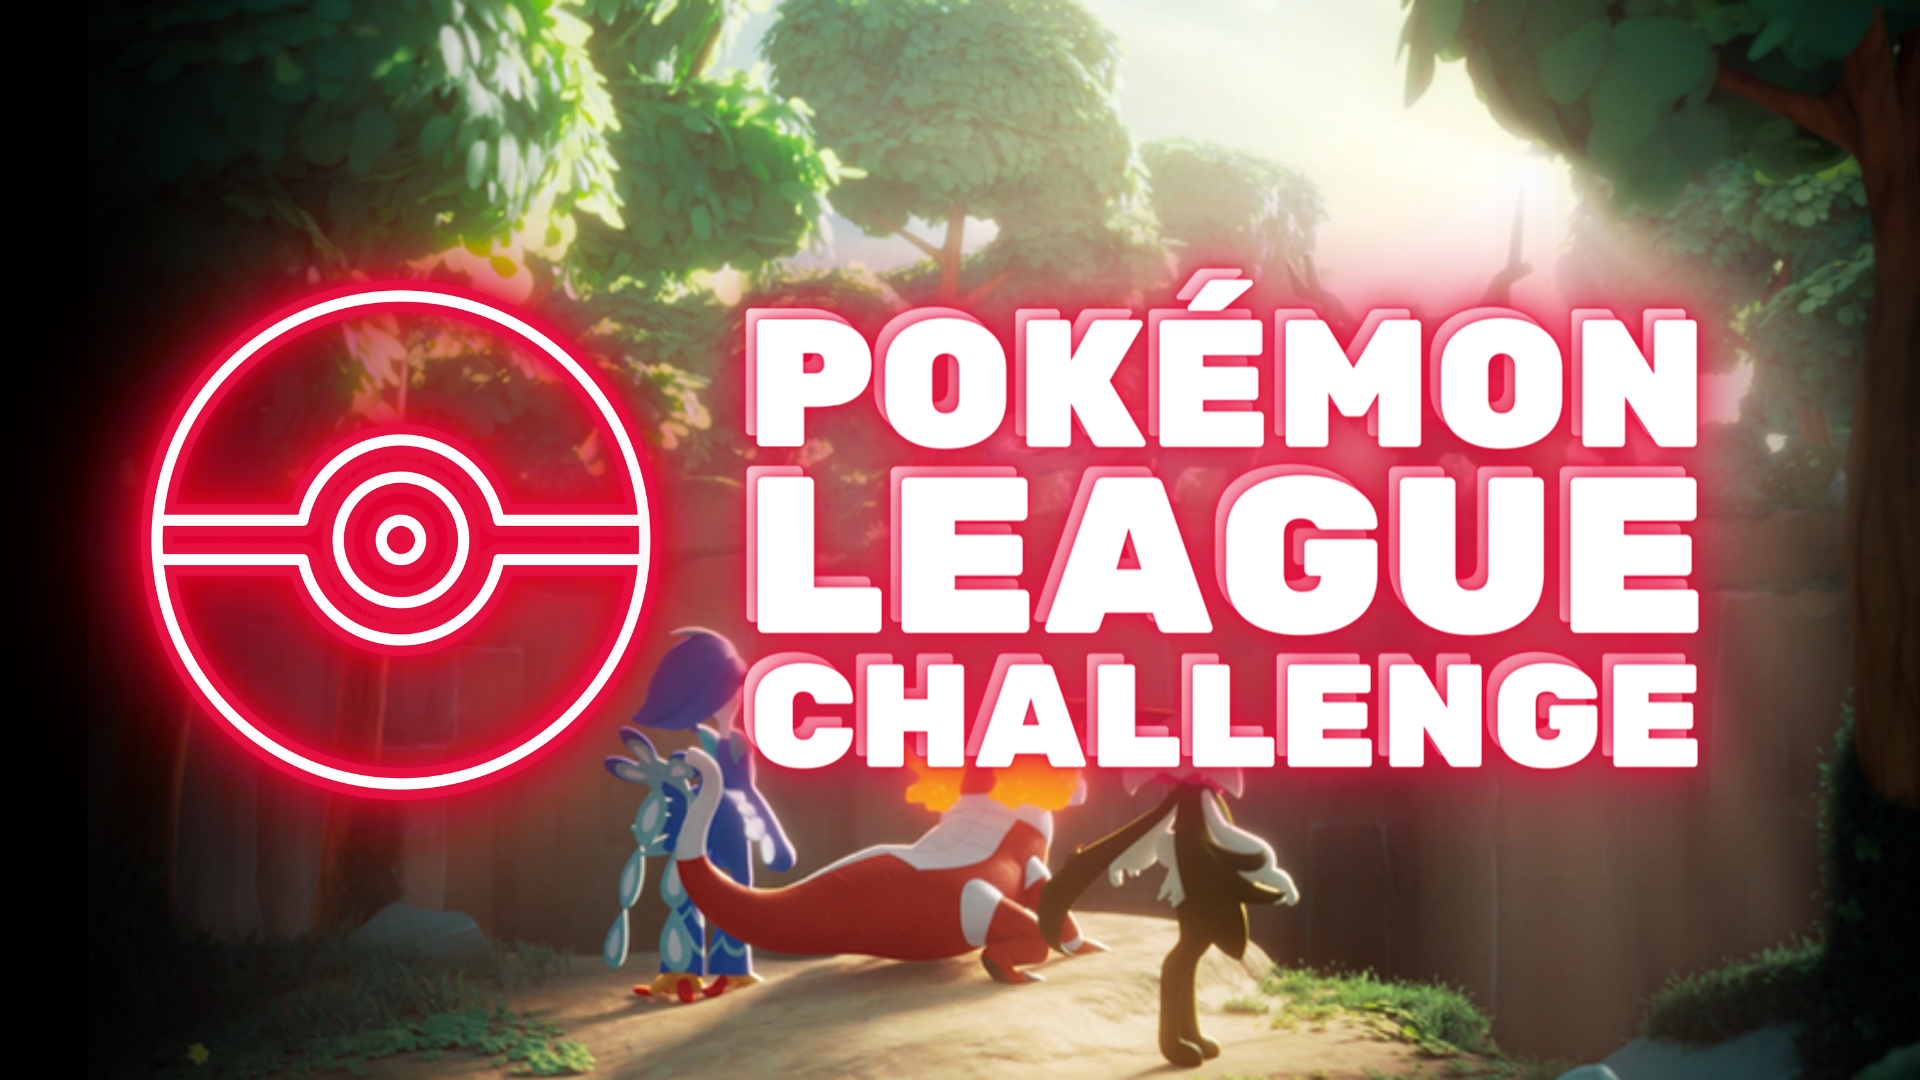 Game On February 18th Noon Pokémon League Challenge